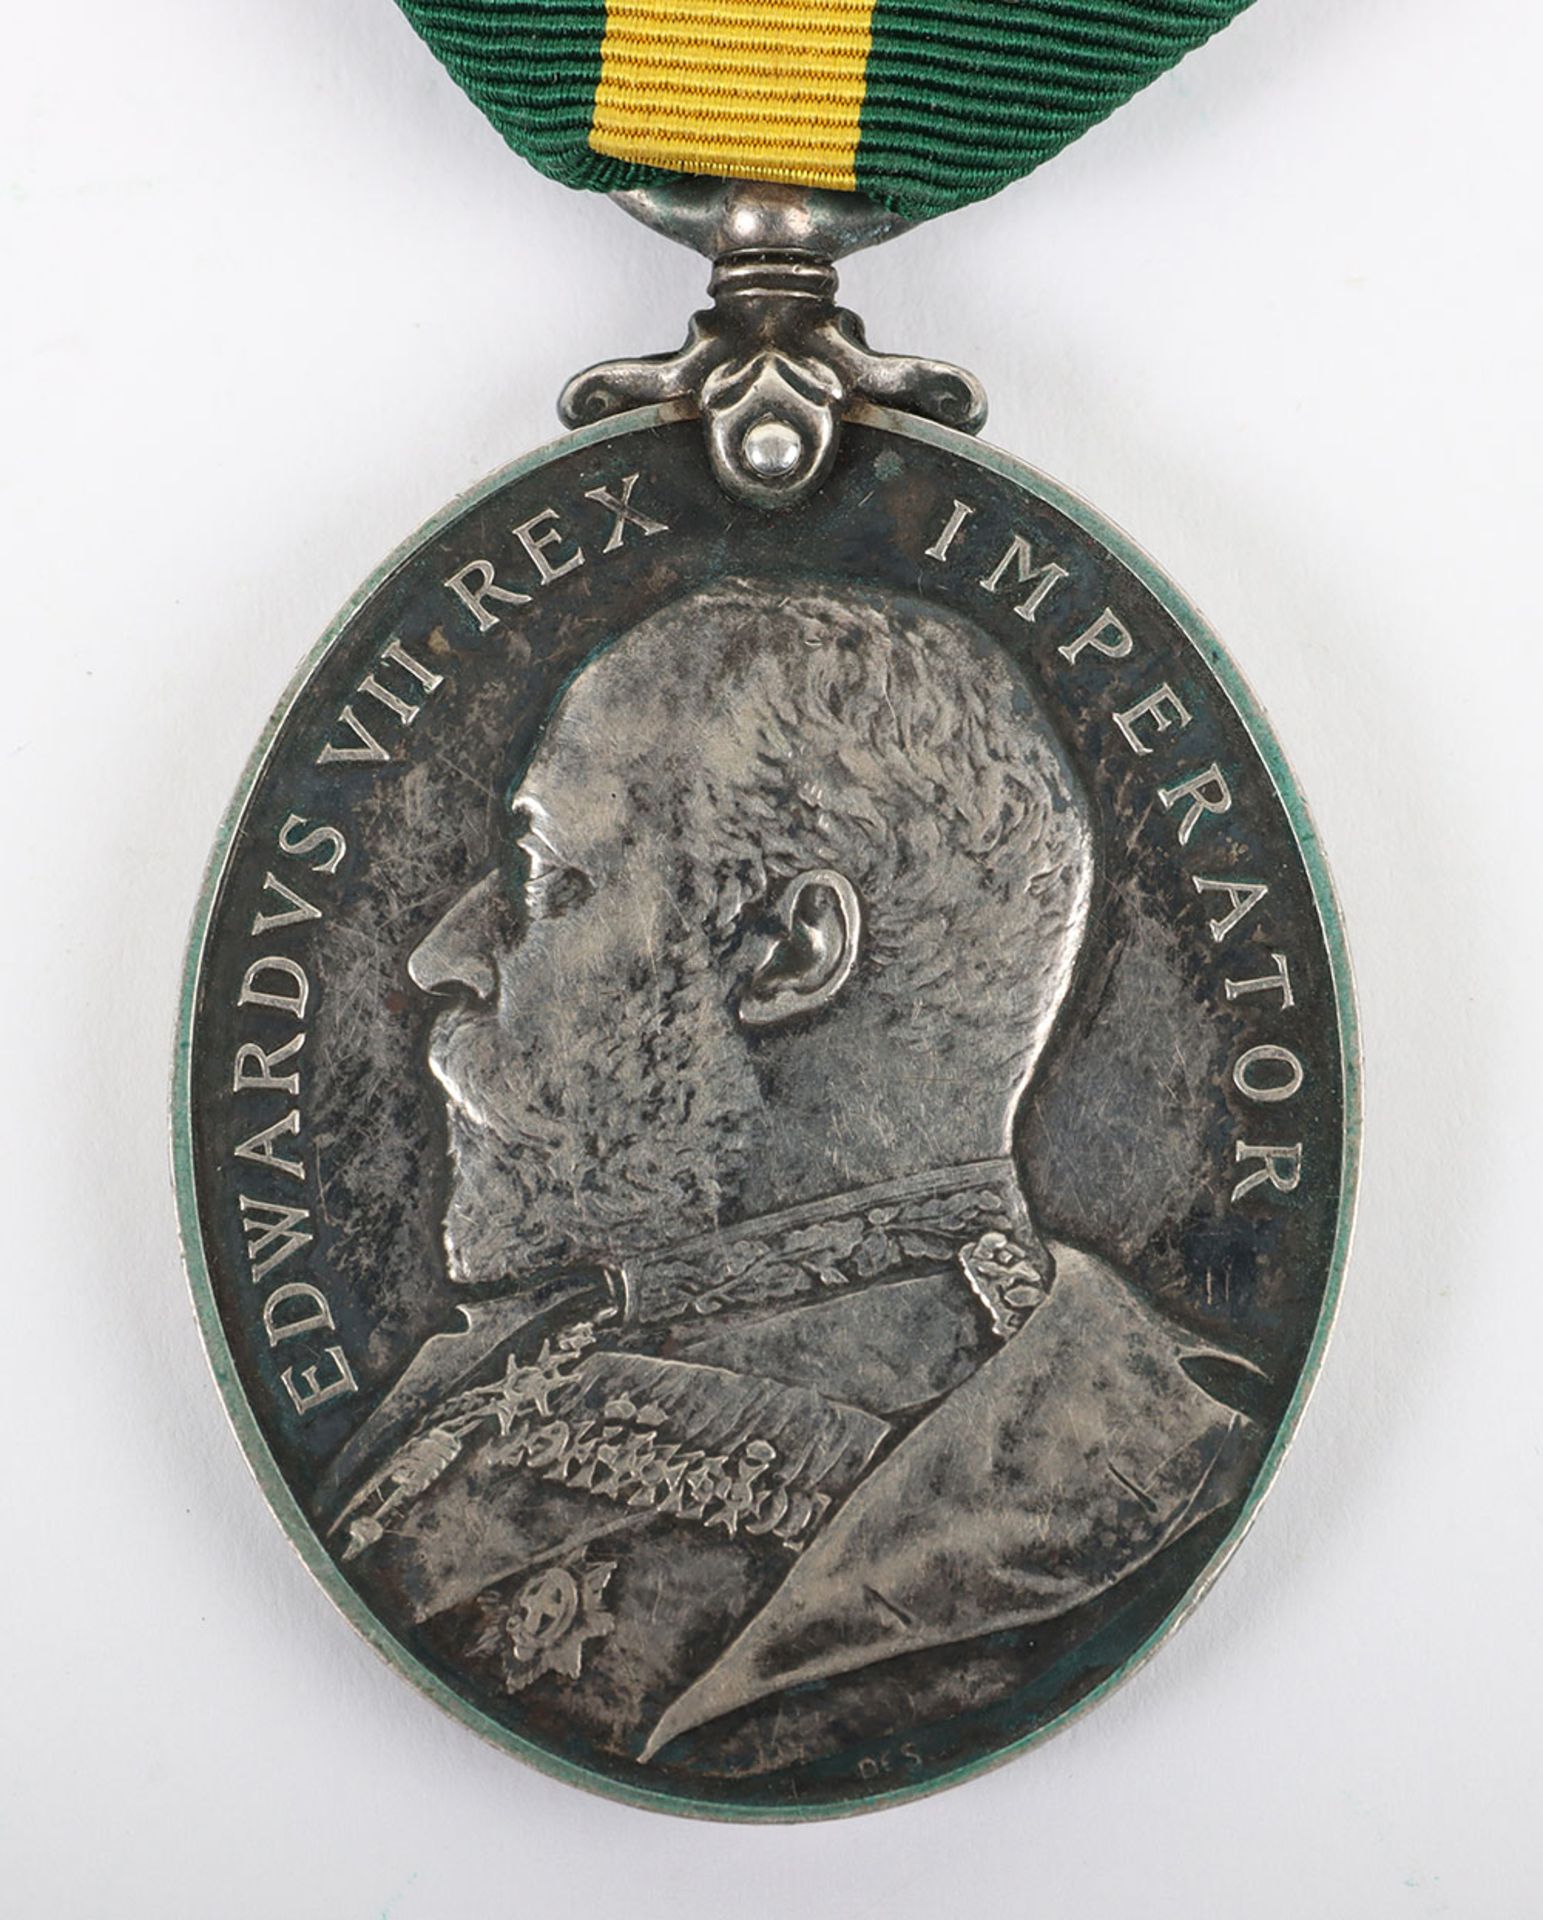 Edward VII Territorial Force Efficiency Medal to the Durham Royal Garrison Artillery - Image 4 of 5